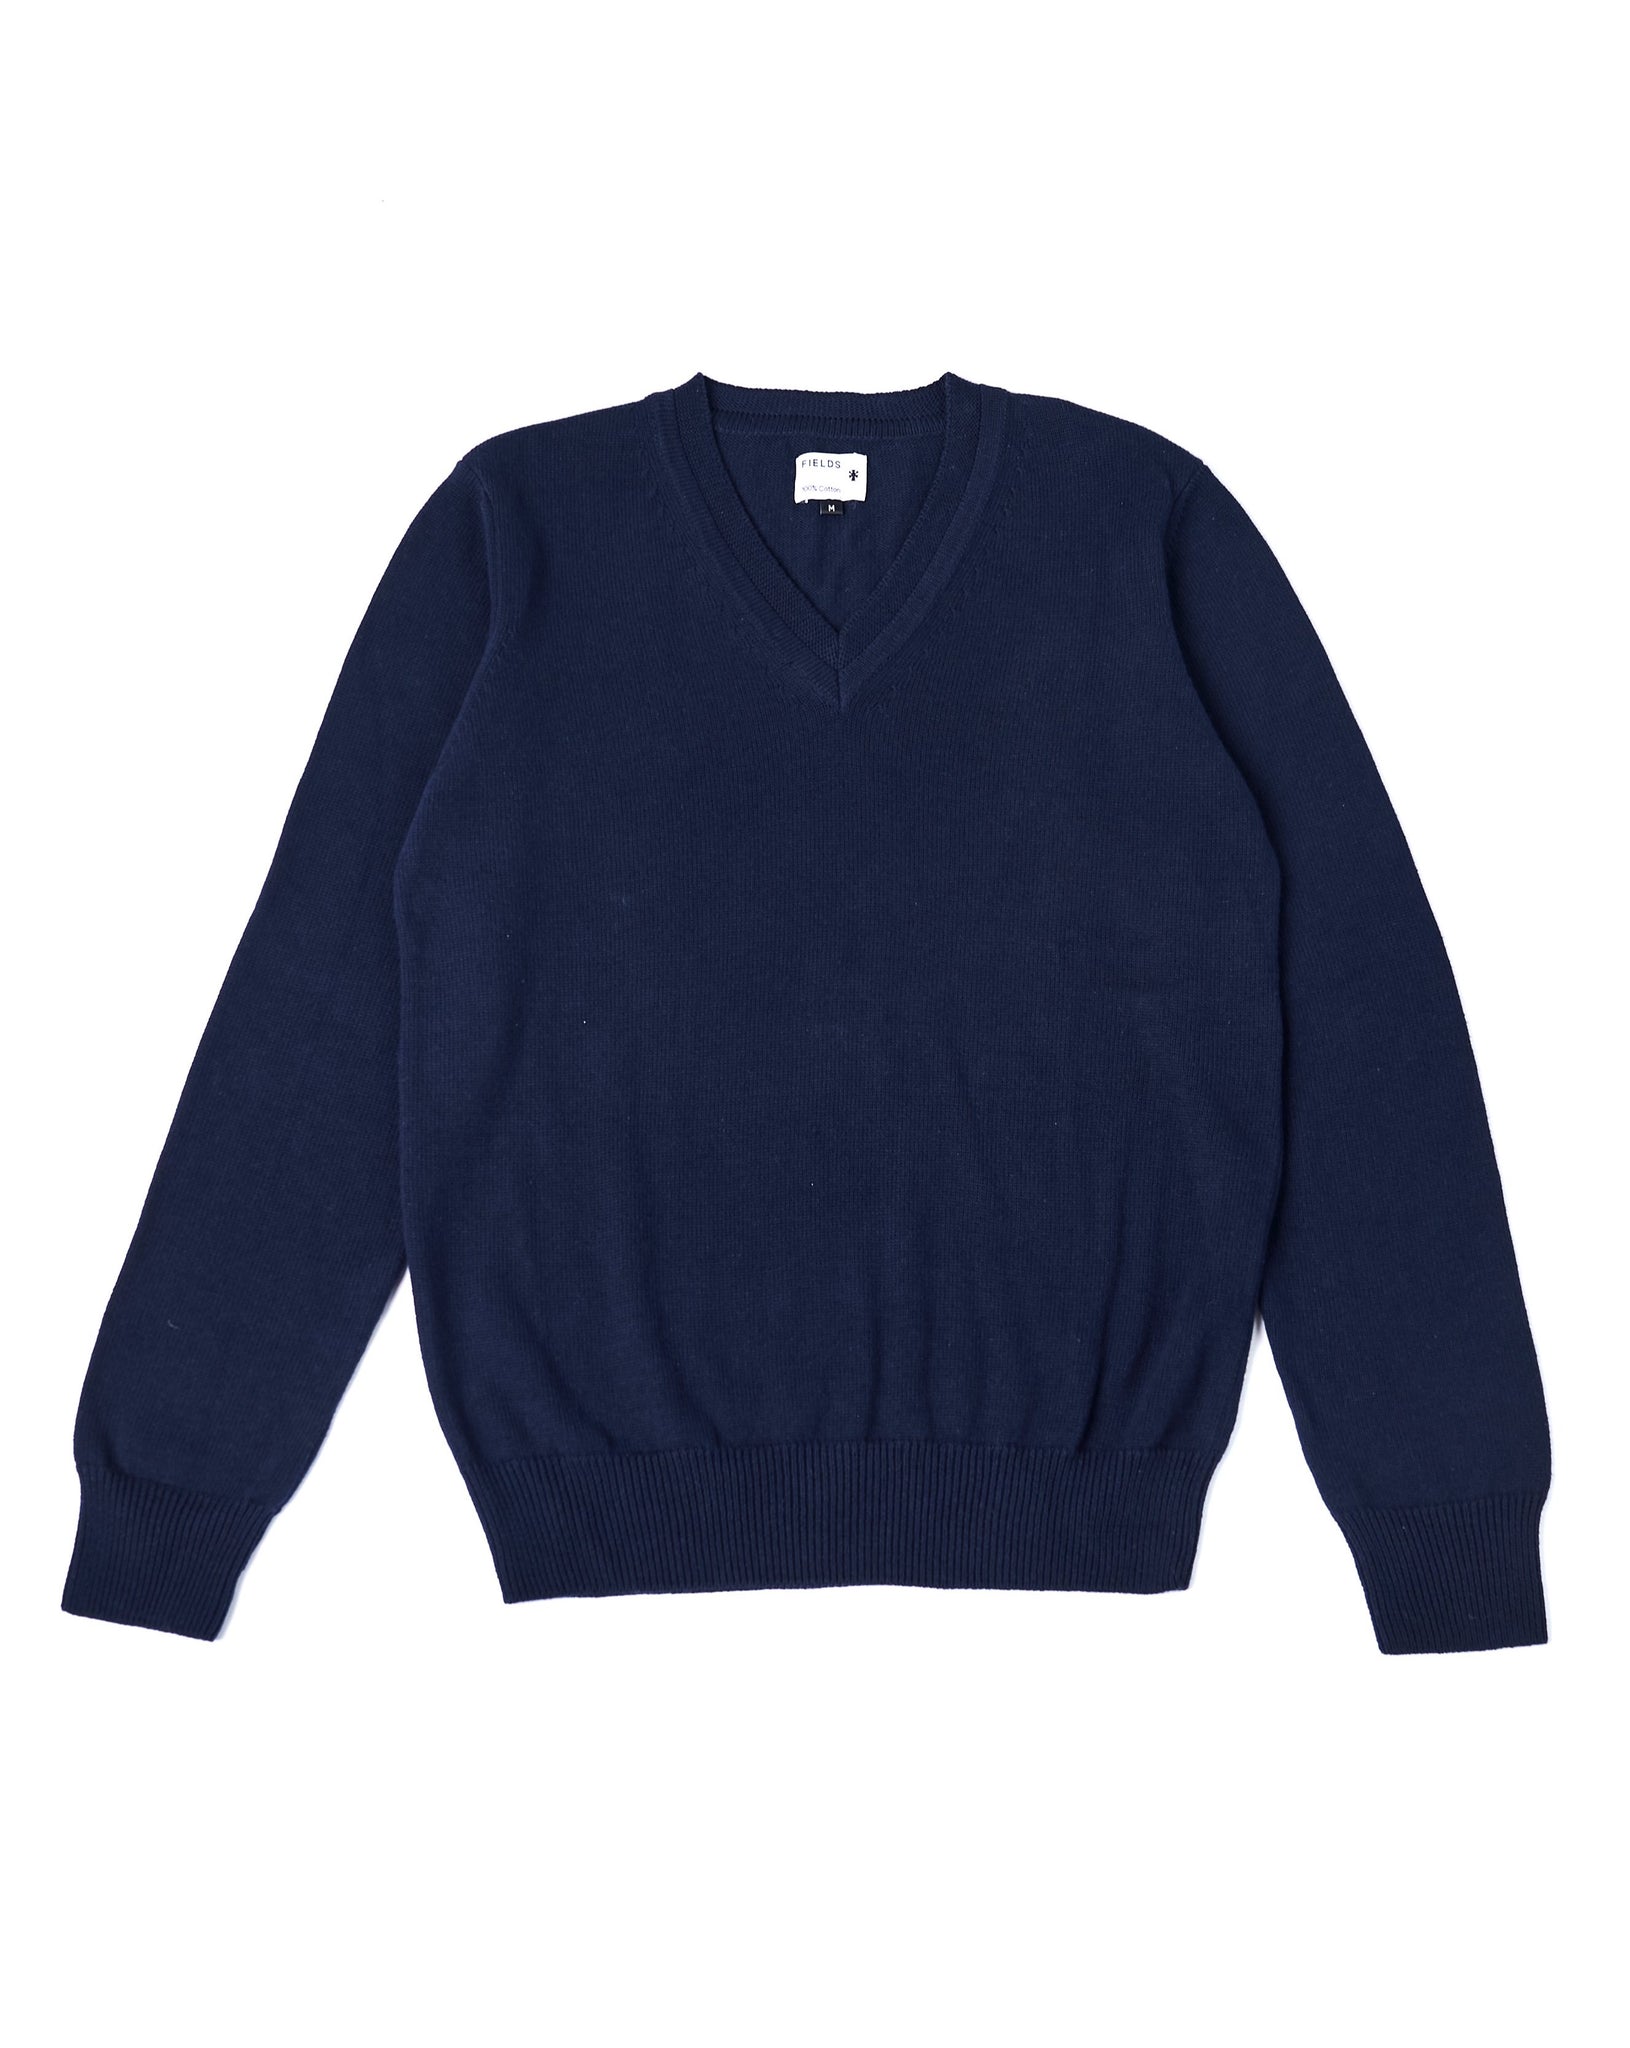 The Cotton V-Neck Sweater in Sky Captain